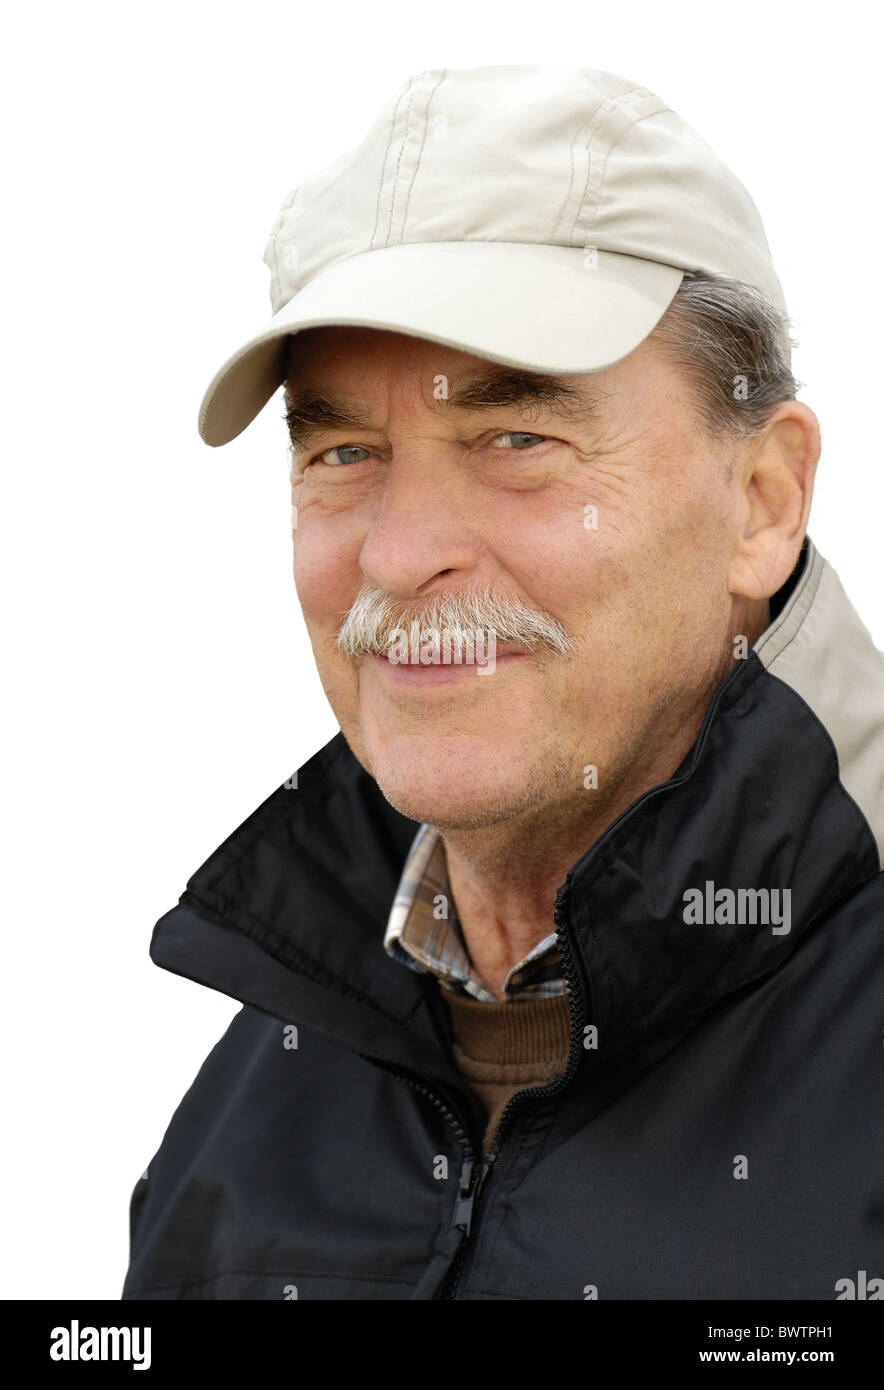 Old man with cap Stock Photo